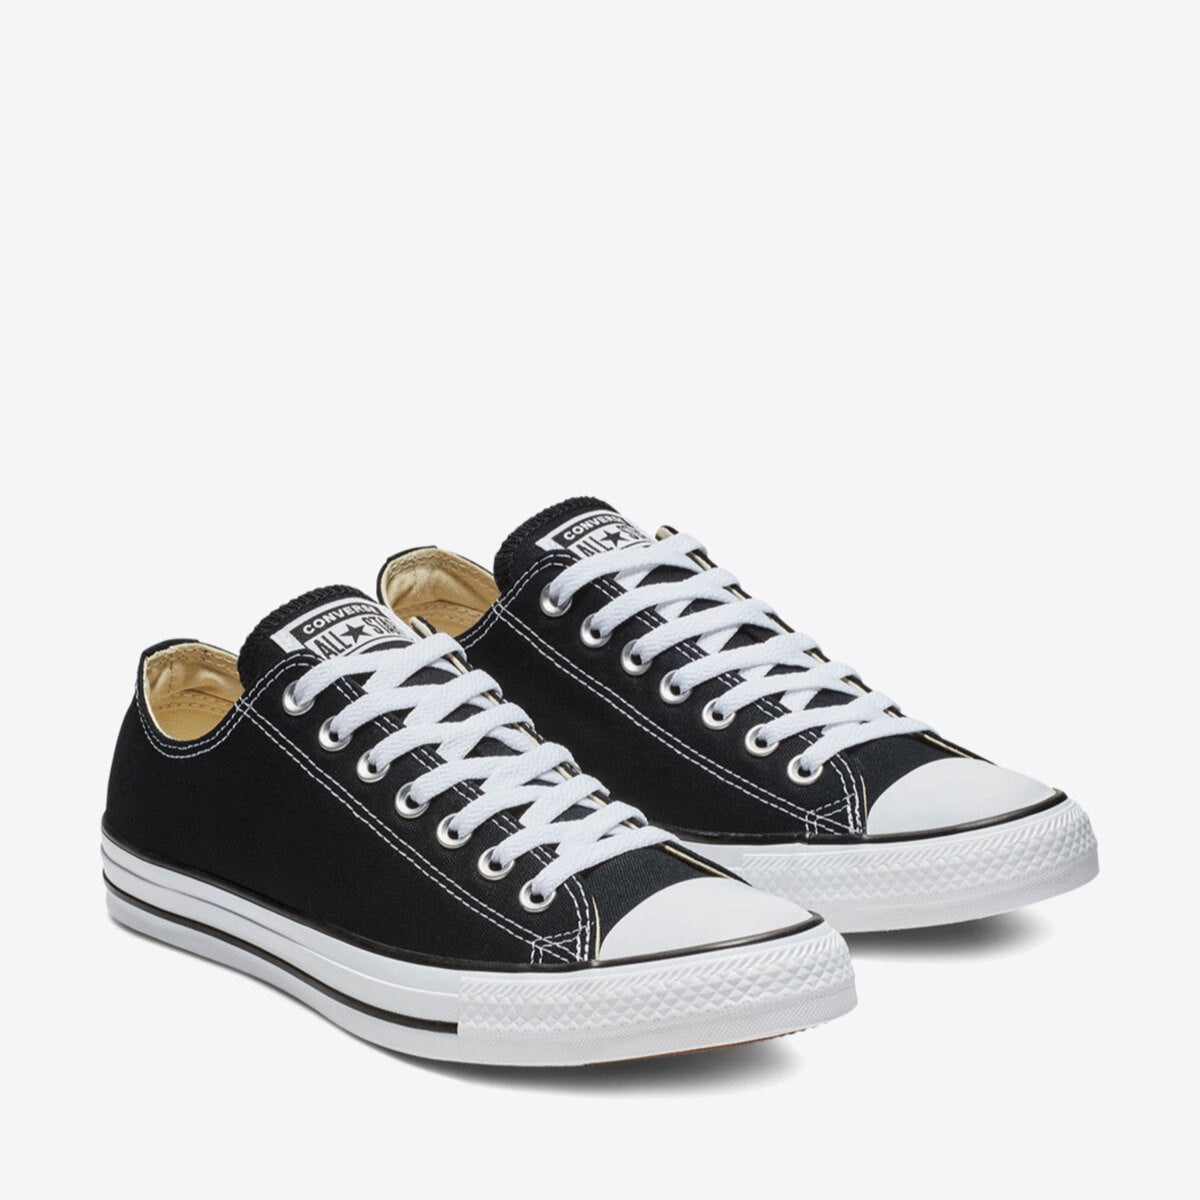  Chuck Taylor All Star Canvas Low Top Black